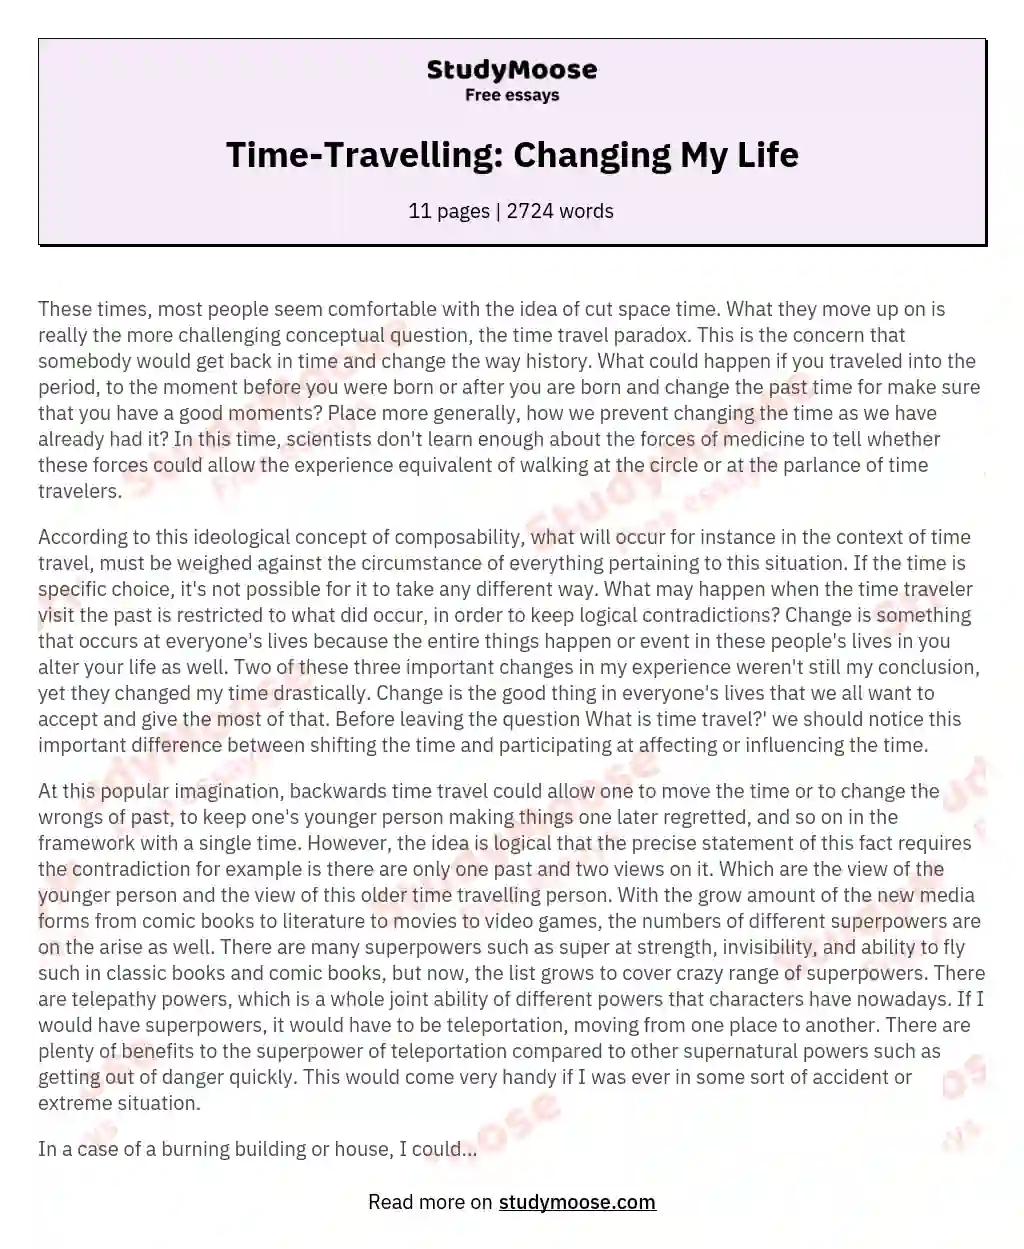 Time-Travelling: Changing My Life essay